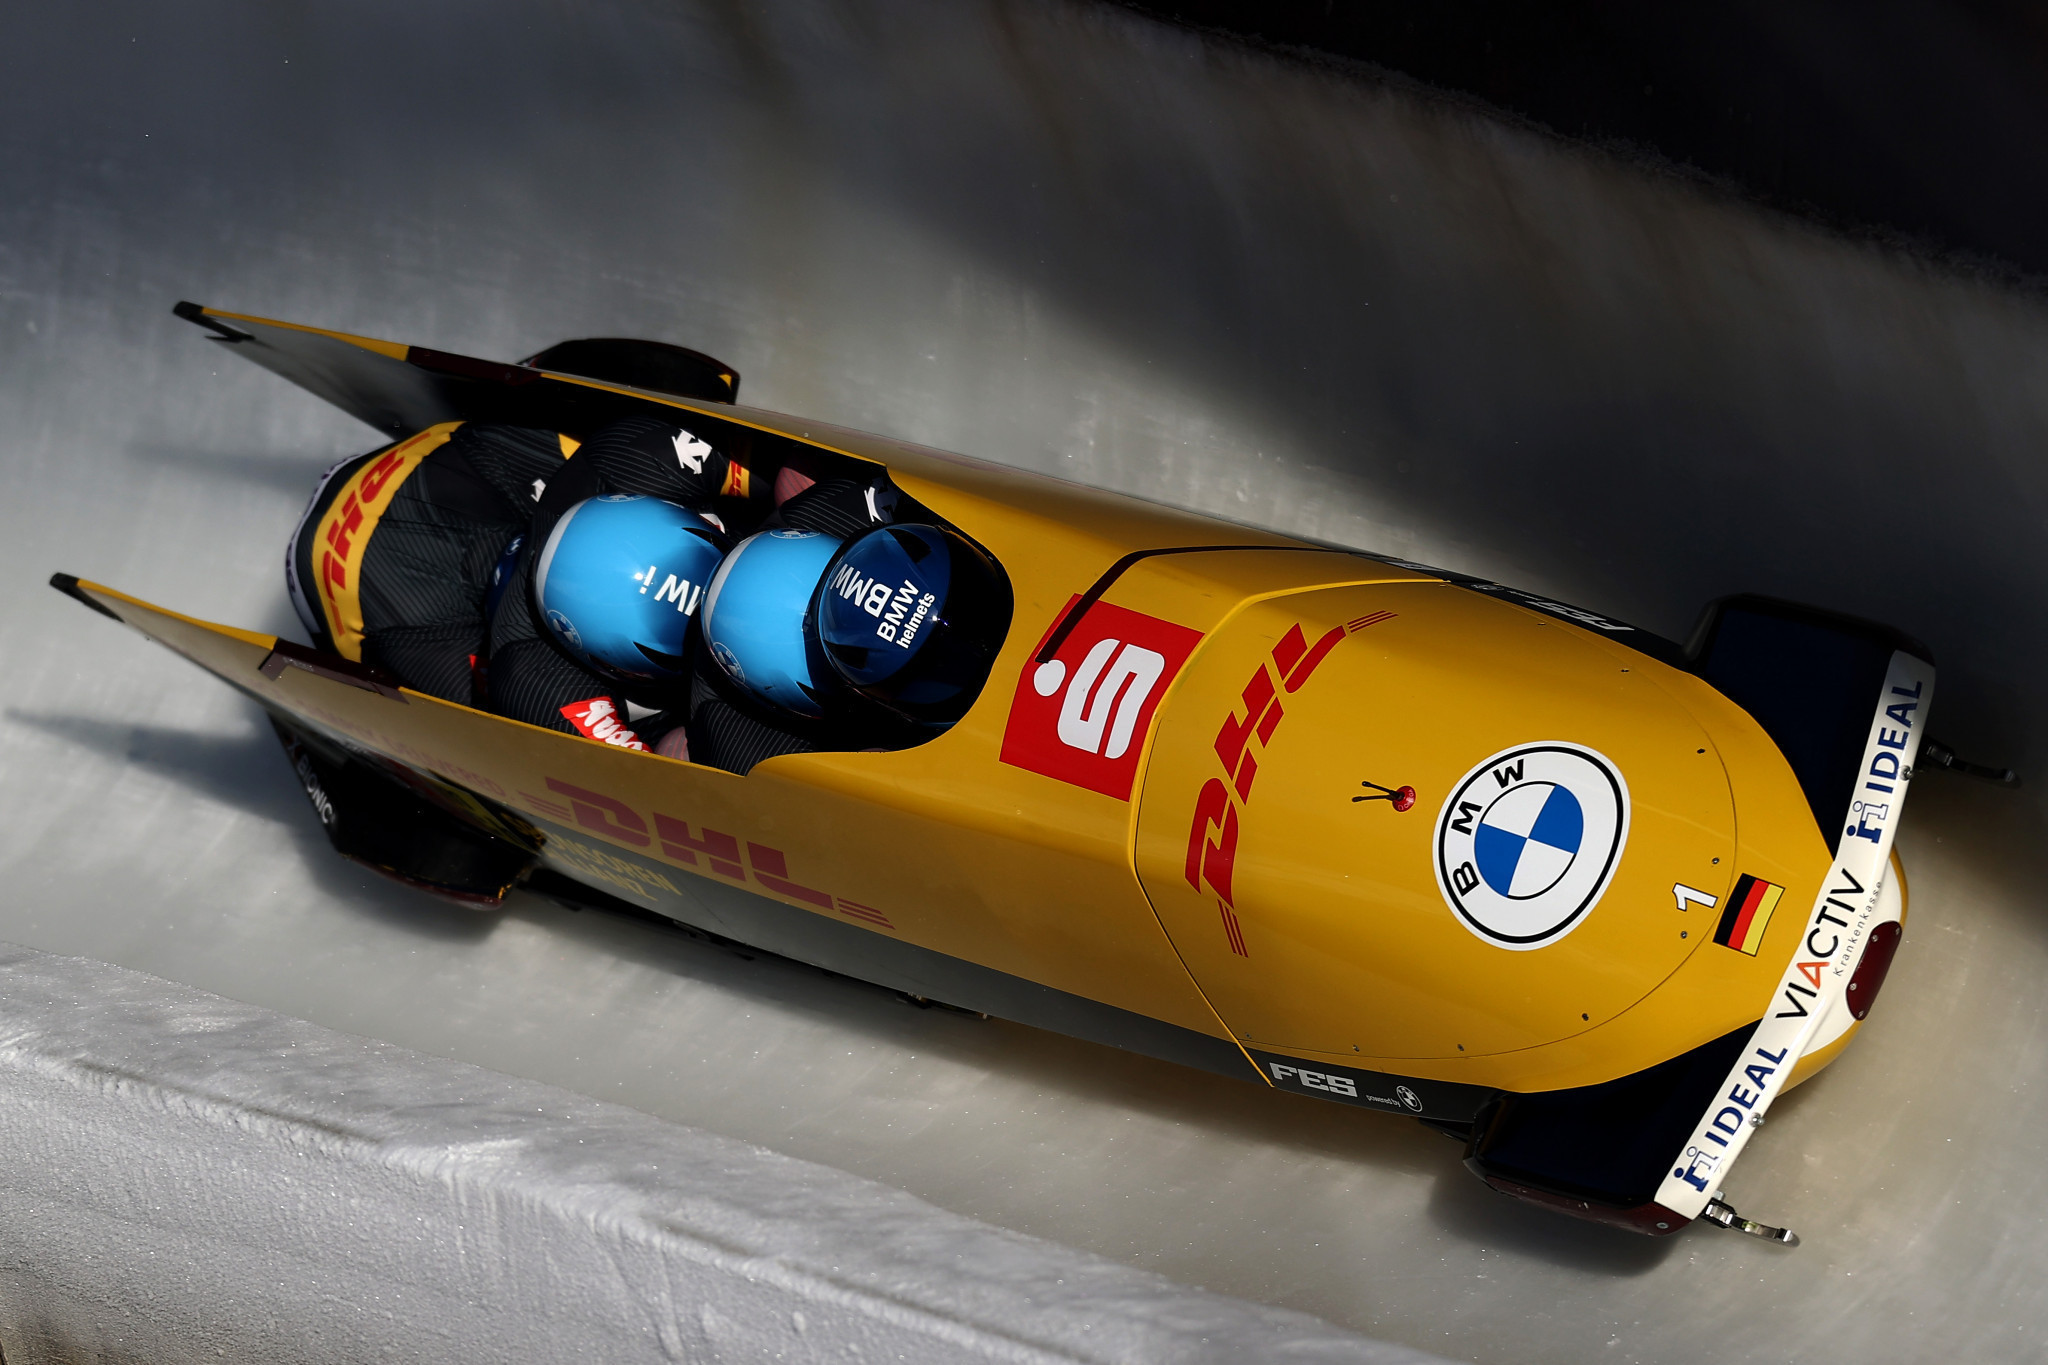 Sigulda to host first bobsleigh races of Winter Olympic year